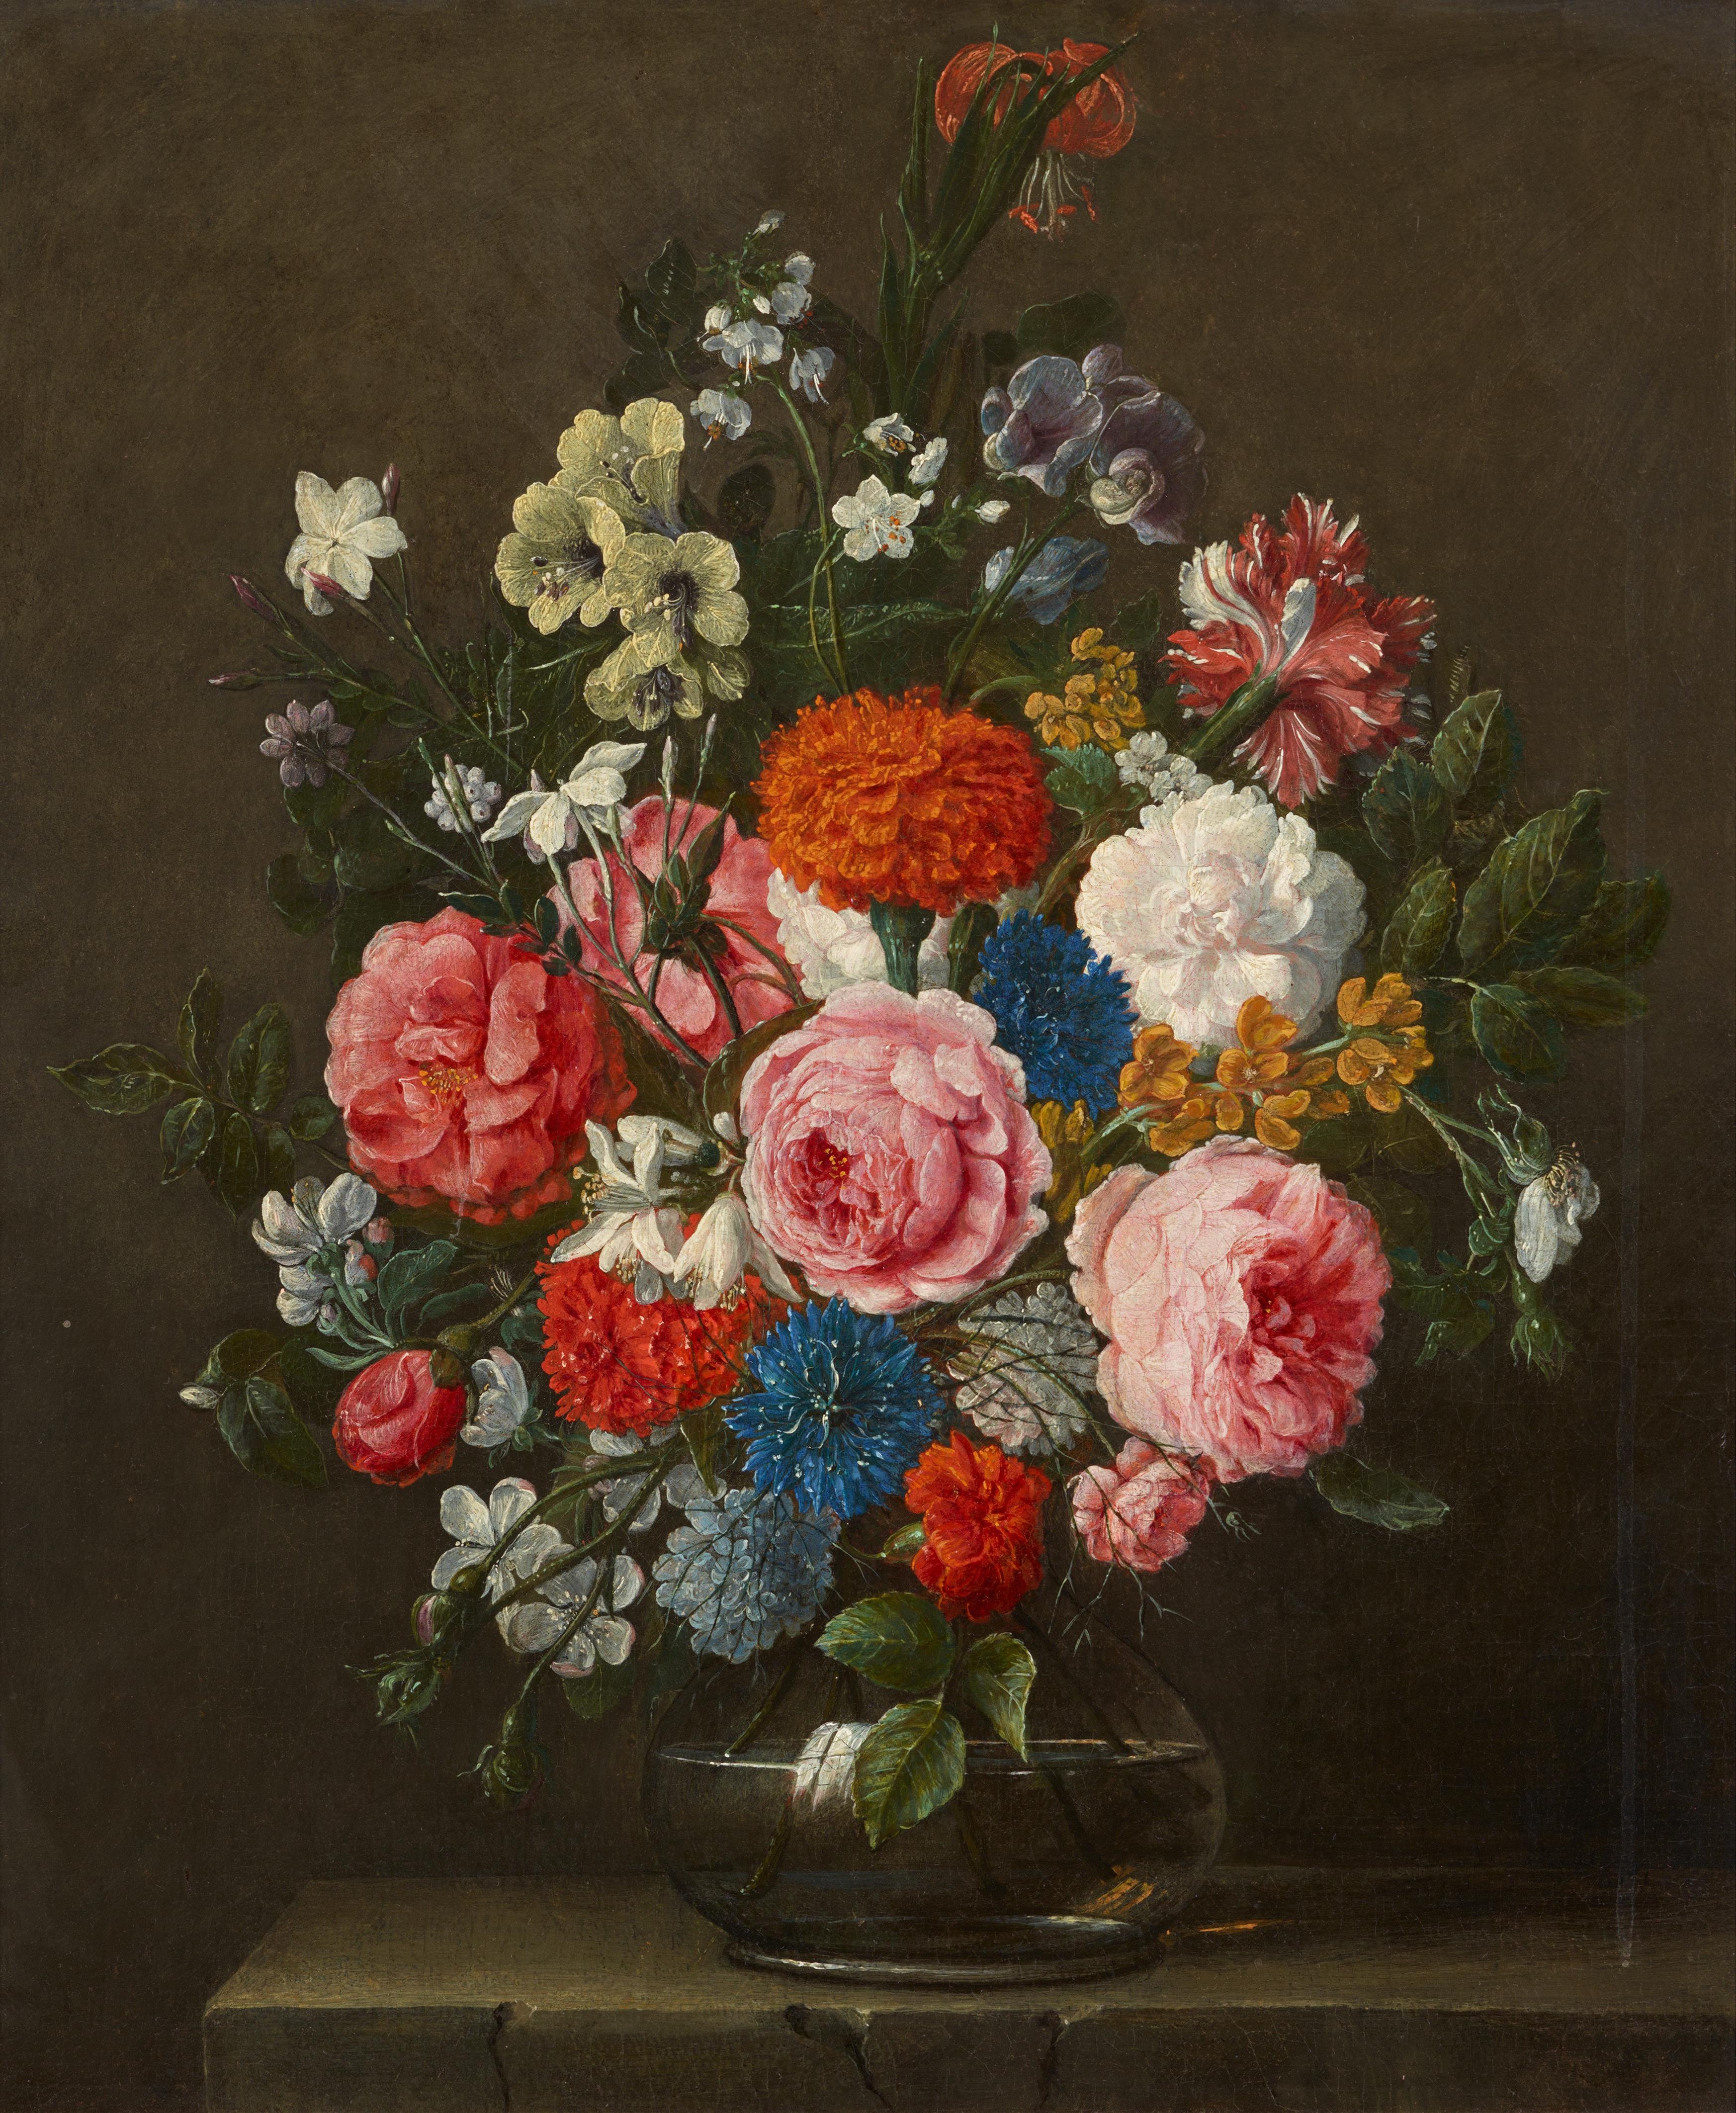 Hieronymus Galle the Elder - Two Floral Still Lifes - image-2